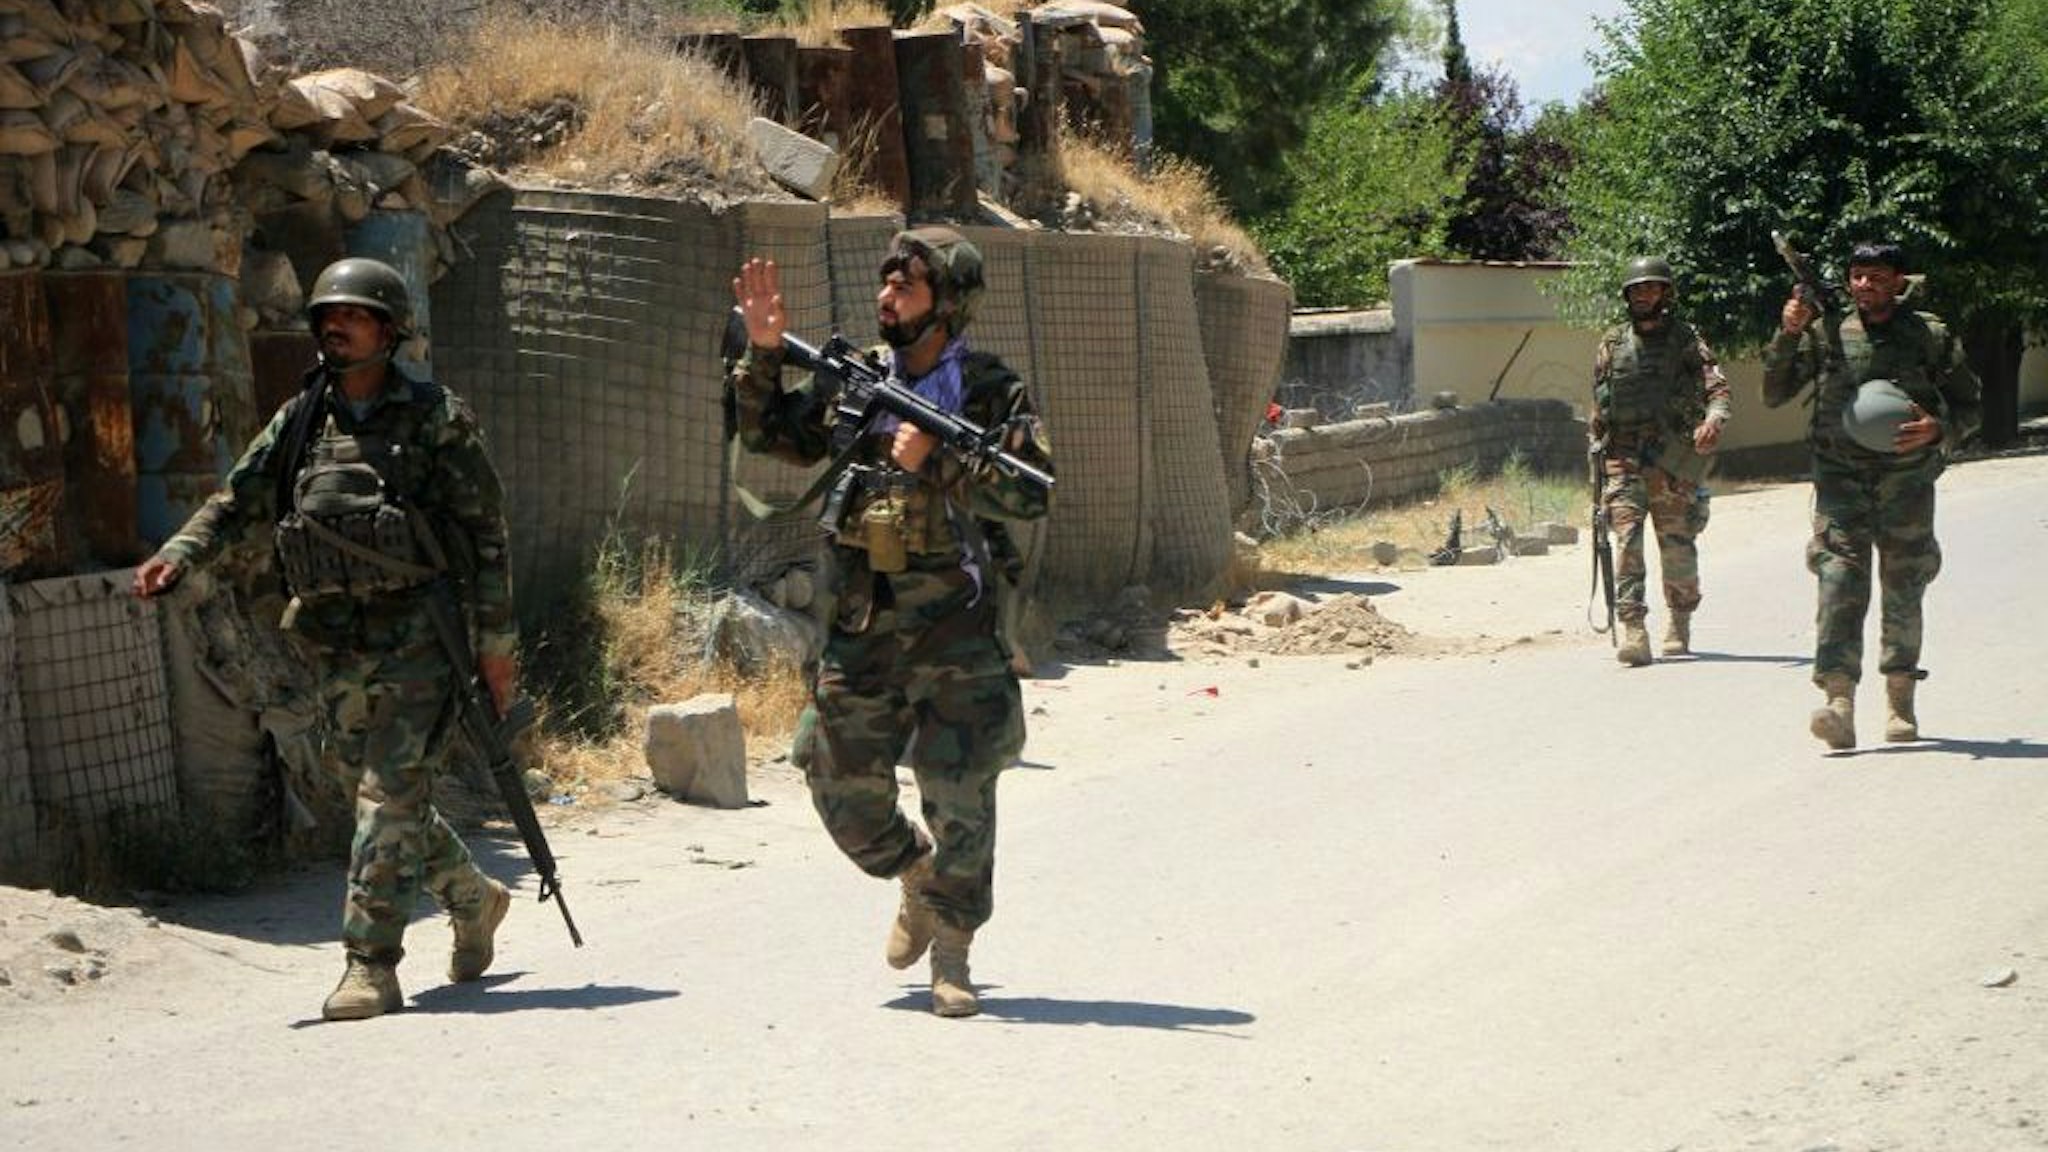 Afghan army soldiers take part in a military operation against Taliban militants in Mehterlam, Laghman province, Afghanistan, on May 24, 2021. Taliban militants have seized three districts over the past weeks amid increasing militancy and counter-militancy in war-torn Afghanistan, local media reported. In its latest attempt to gain ground, the Taliban militants overrun Jalriz district in eastern Wardak province and Dawlat Shah district in Laghman province. The Taliban militants also captured Burka district in northern Baghlan province early in May in the wake of fierce fighting. (Photo by Saifurahman Safi/Xinhua via Getty Images)